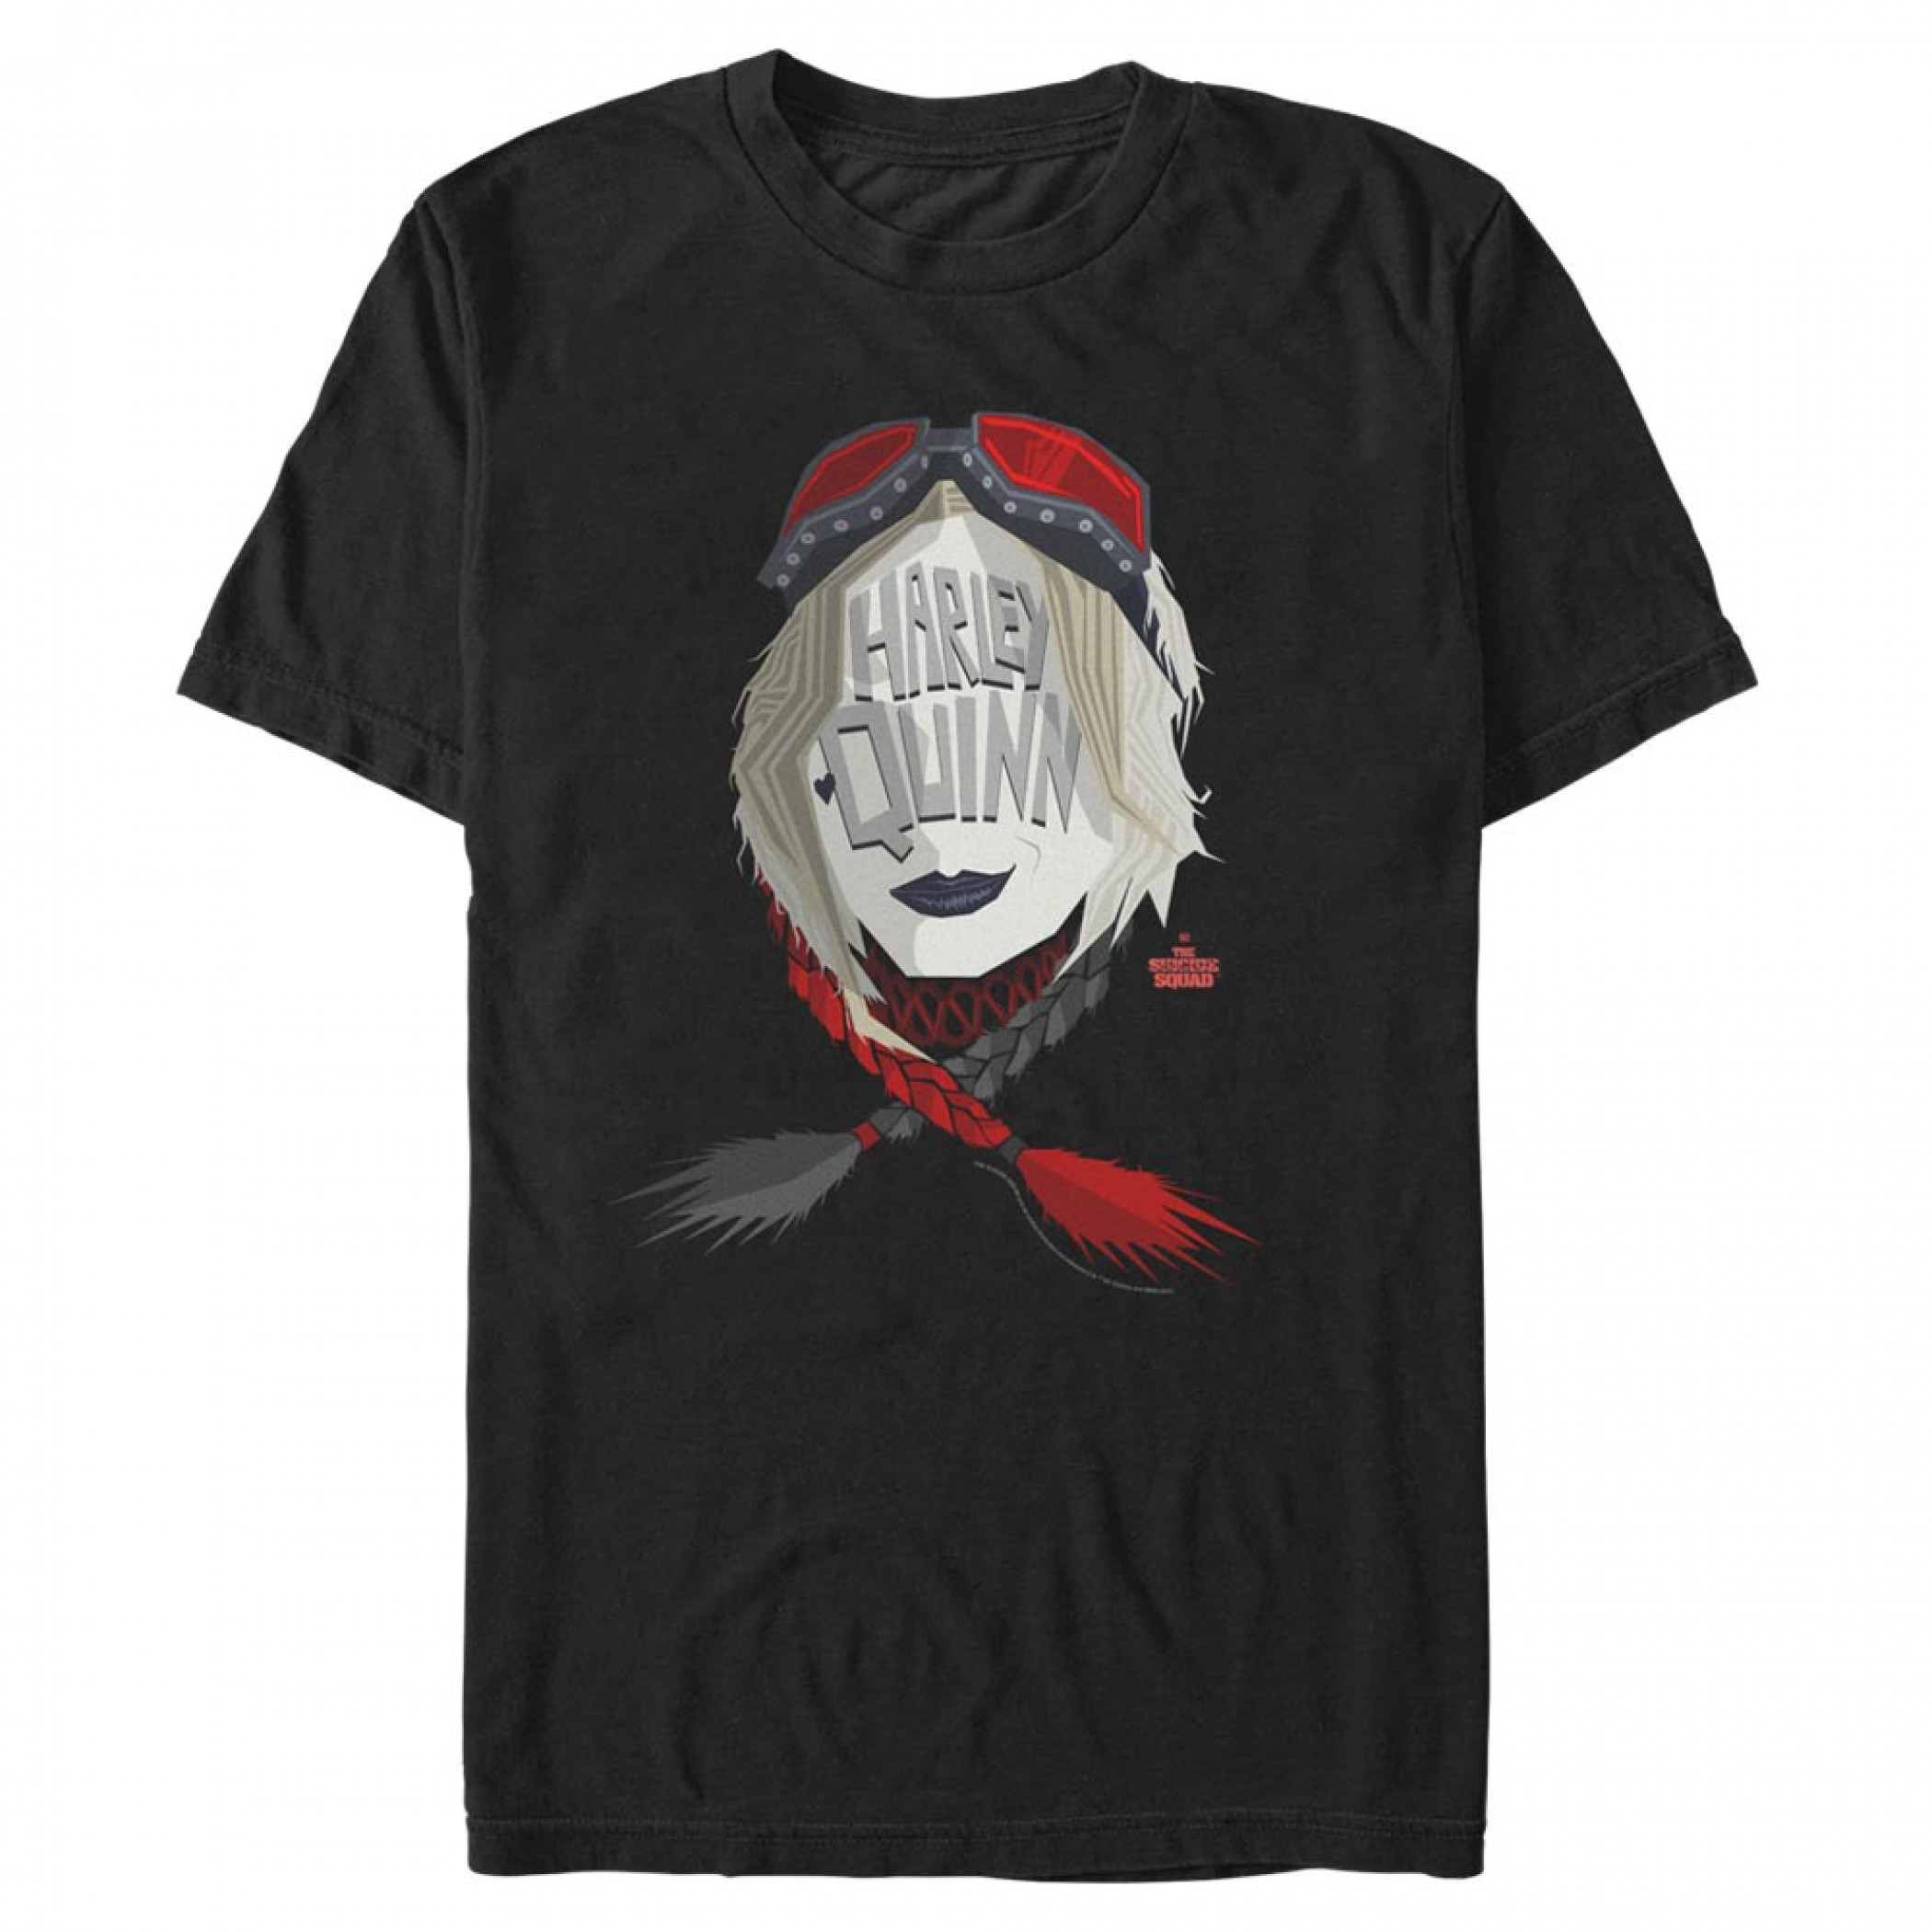 The Suicide Squad Harley Quinn Stylized Character Men's T-Shirt